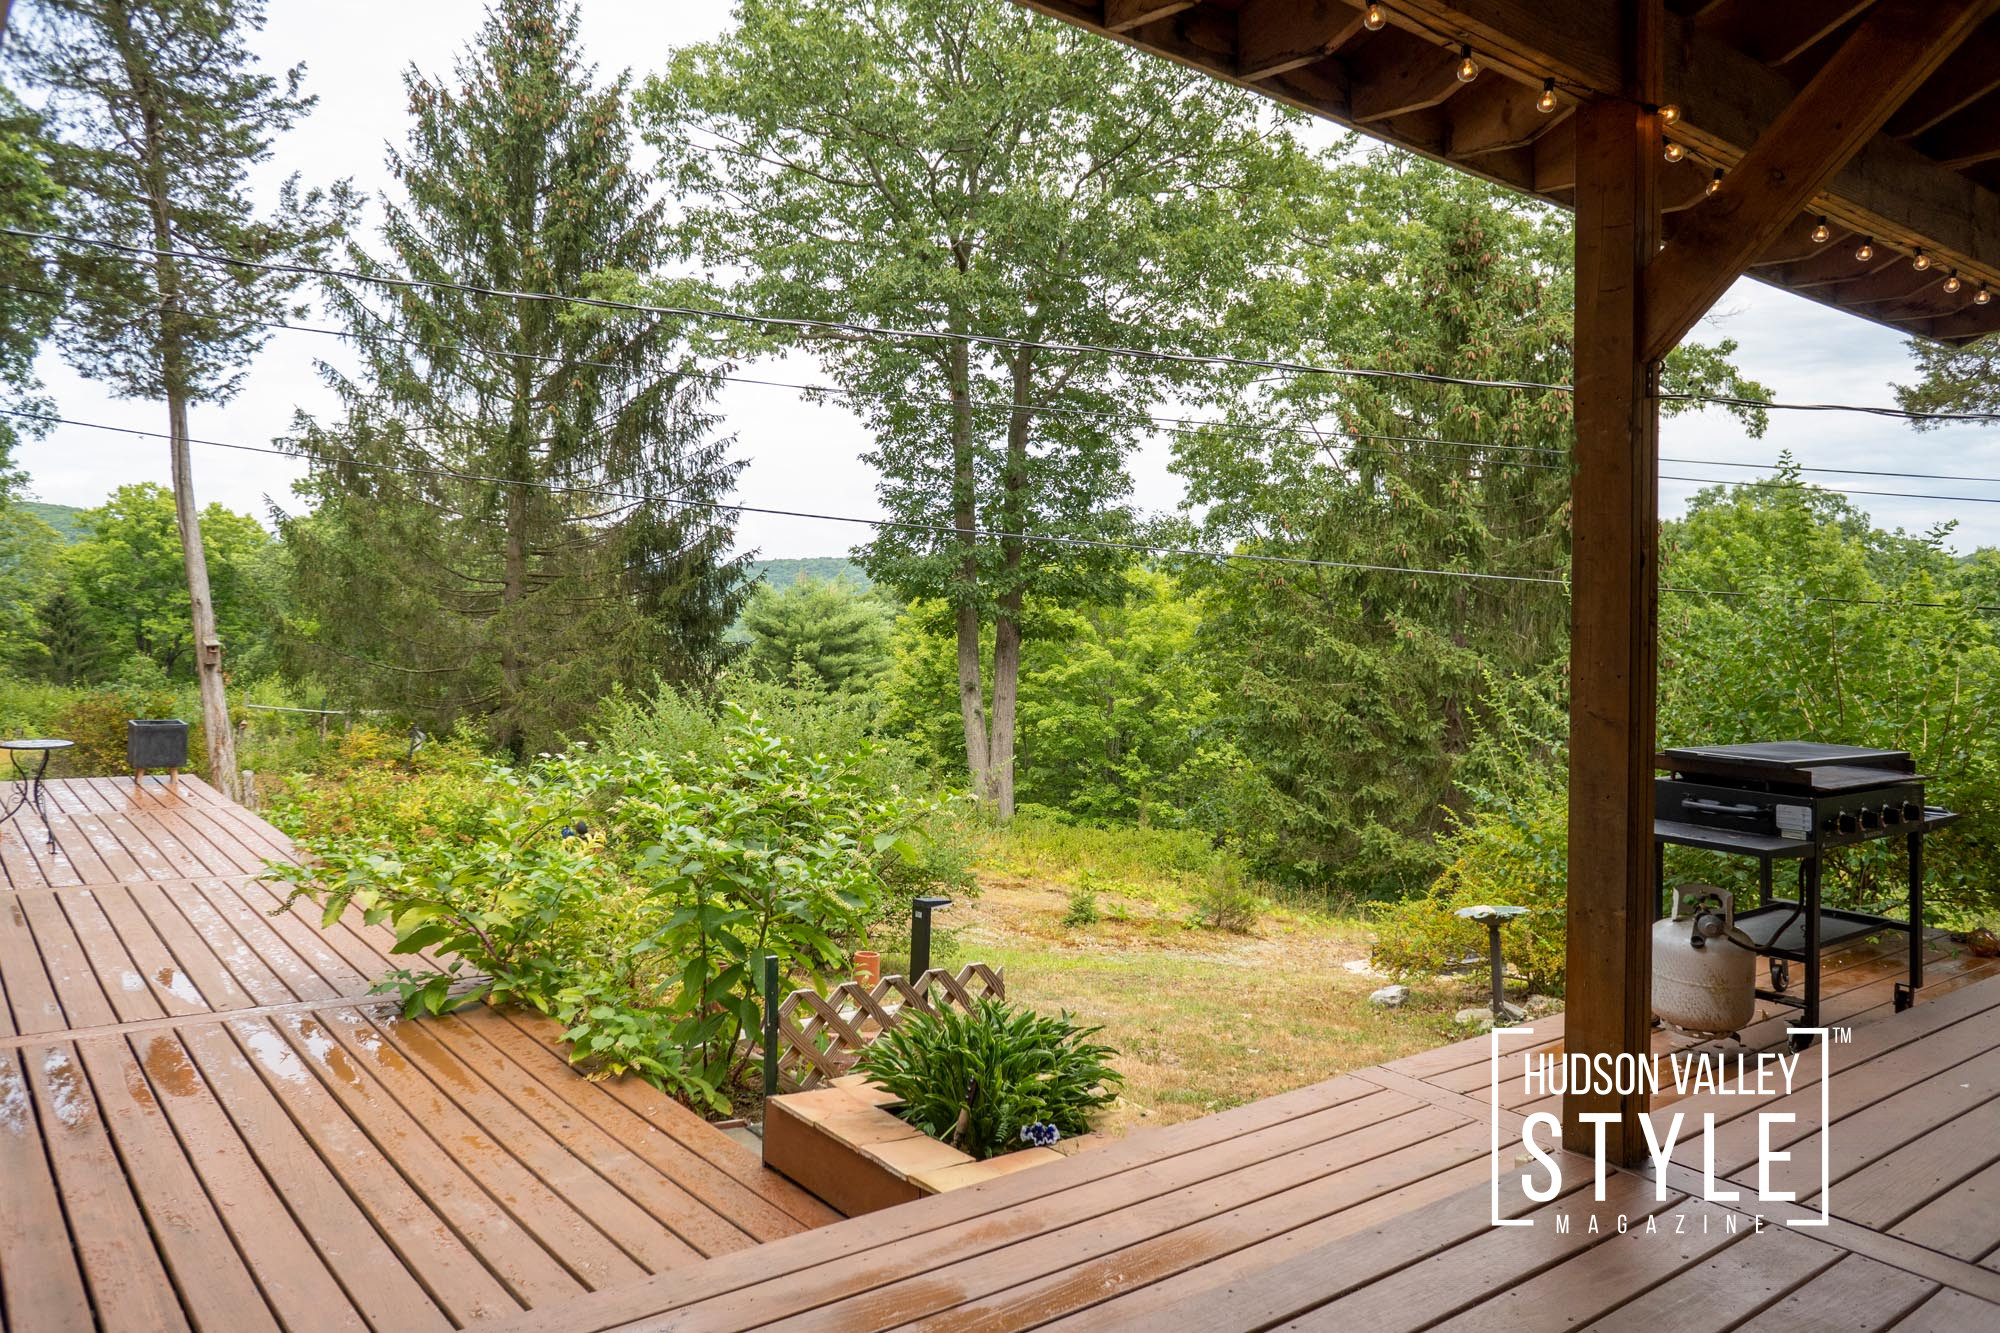 Experience the Magic of Hudson Valley and Upstate, NY at this Secluded Modern Rustic Mountain Cabin – Airbnb Photography by Alluvion Media – Vacation Rental Management by Alluvion Vacations